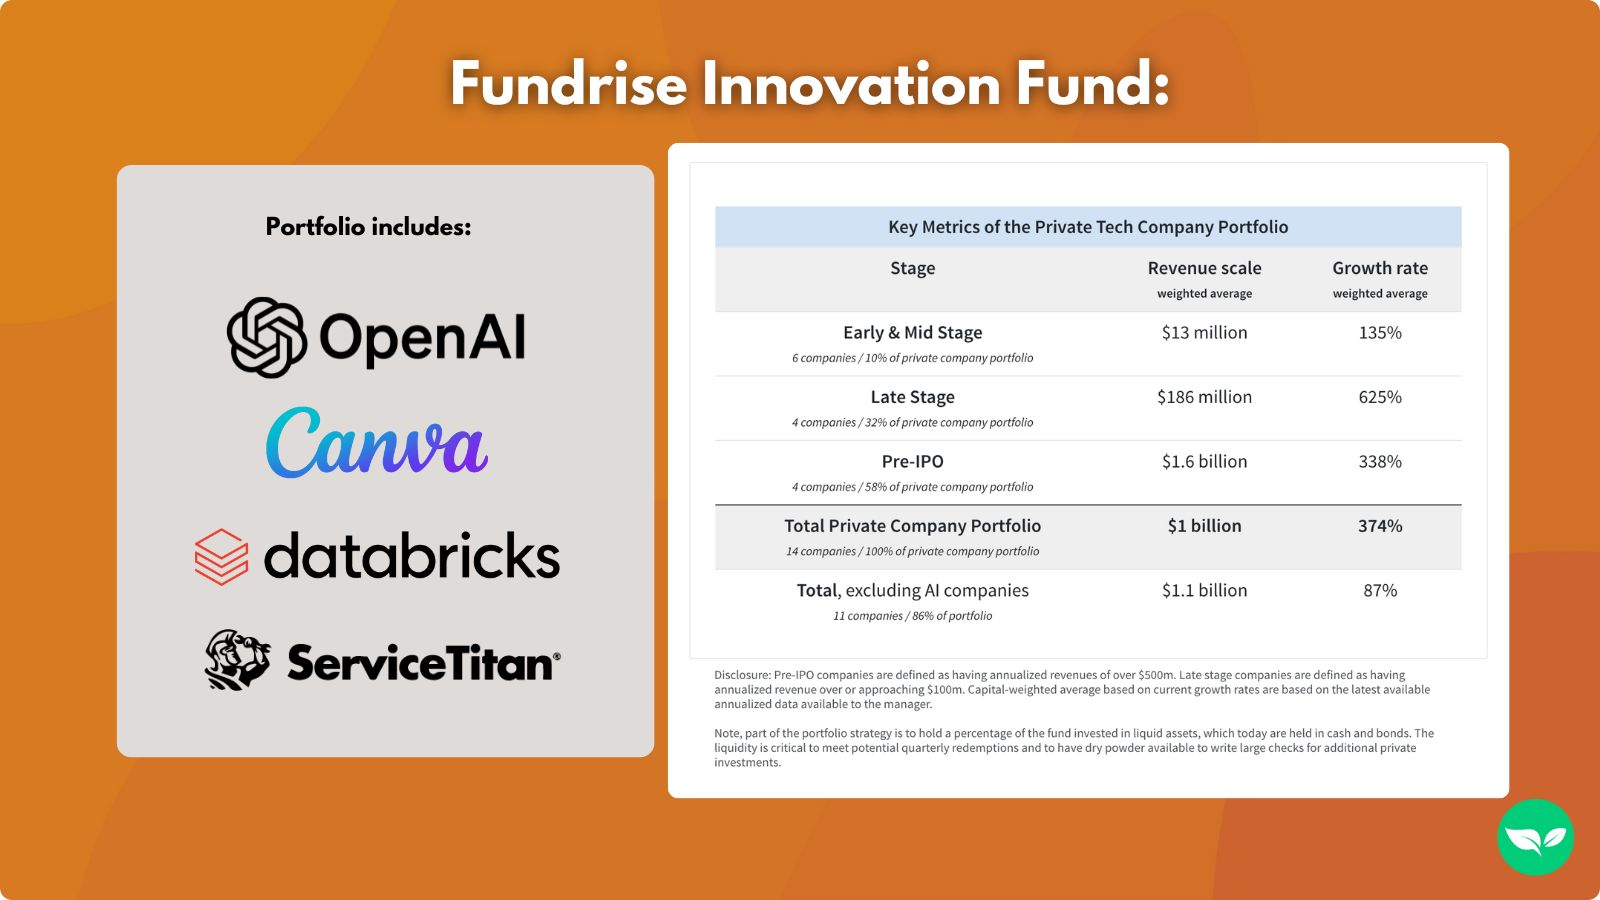 A screenshot showing some basic information on the Fundrise Innovation Fund.